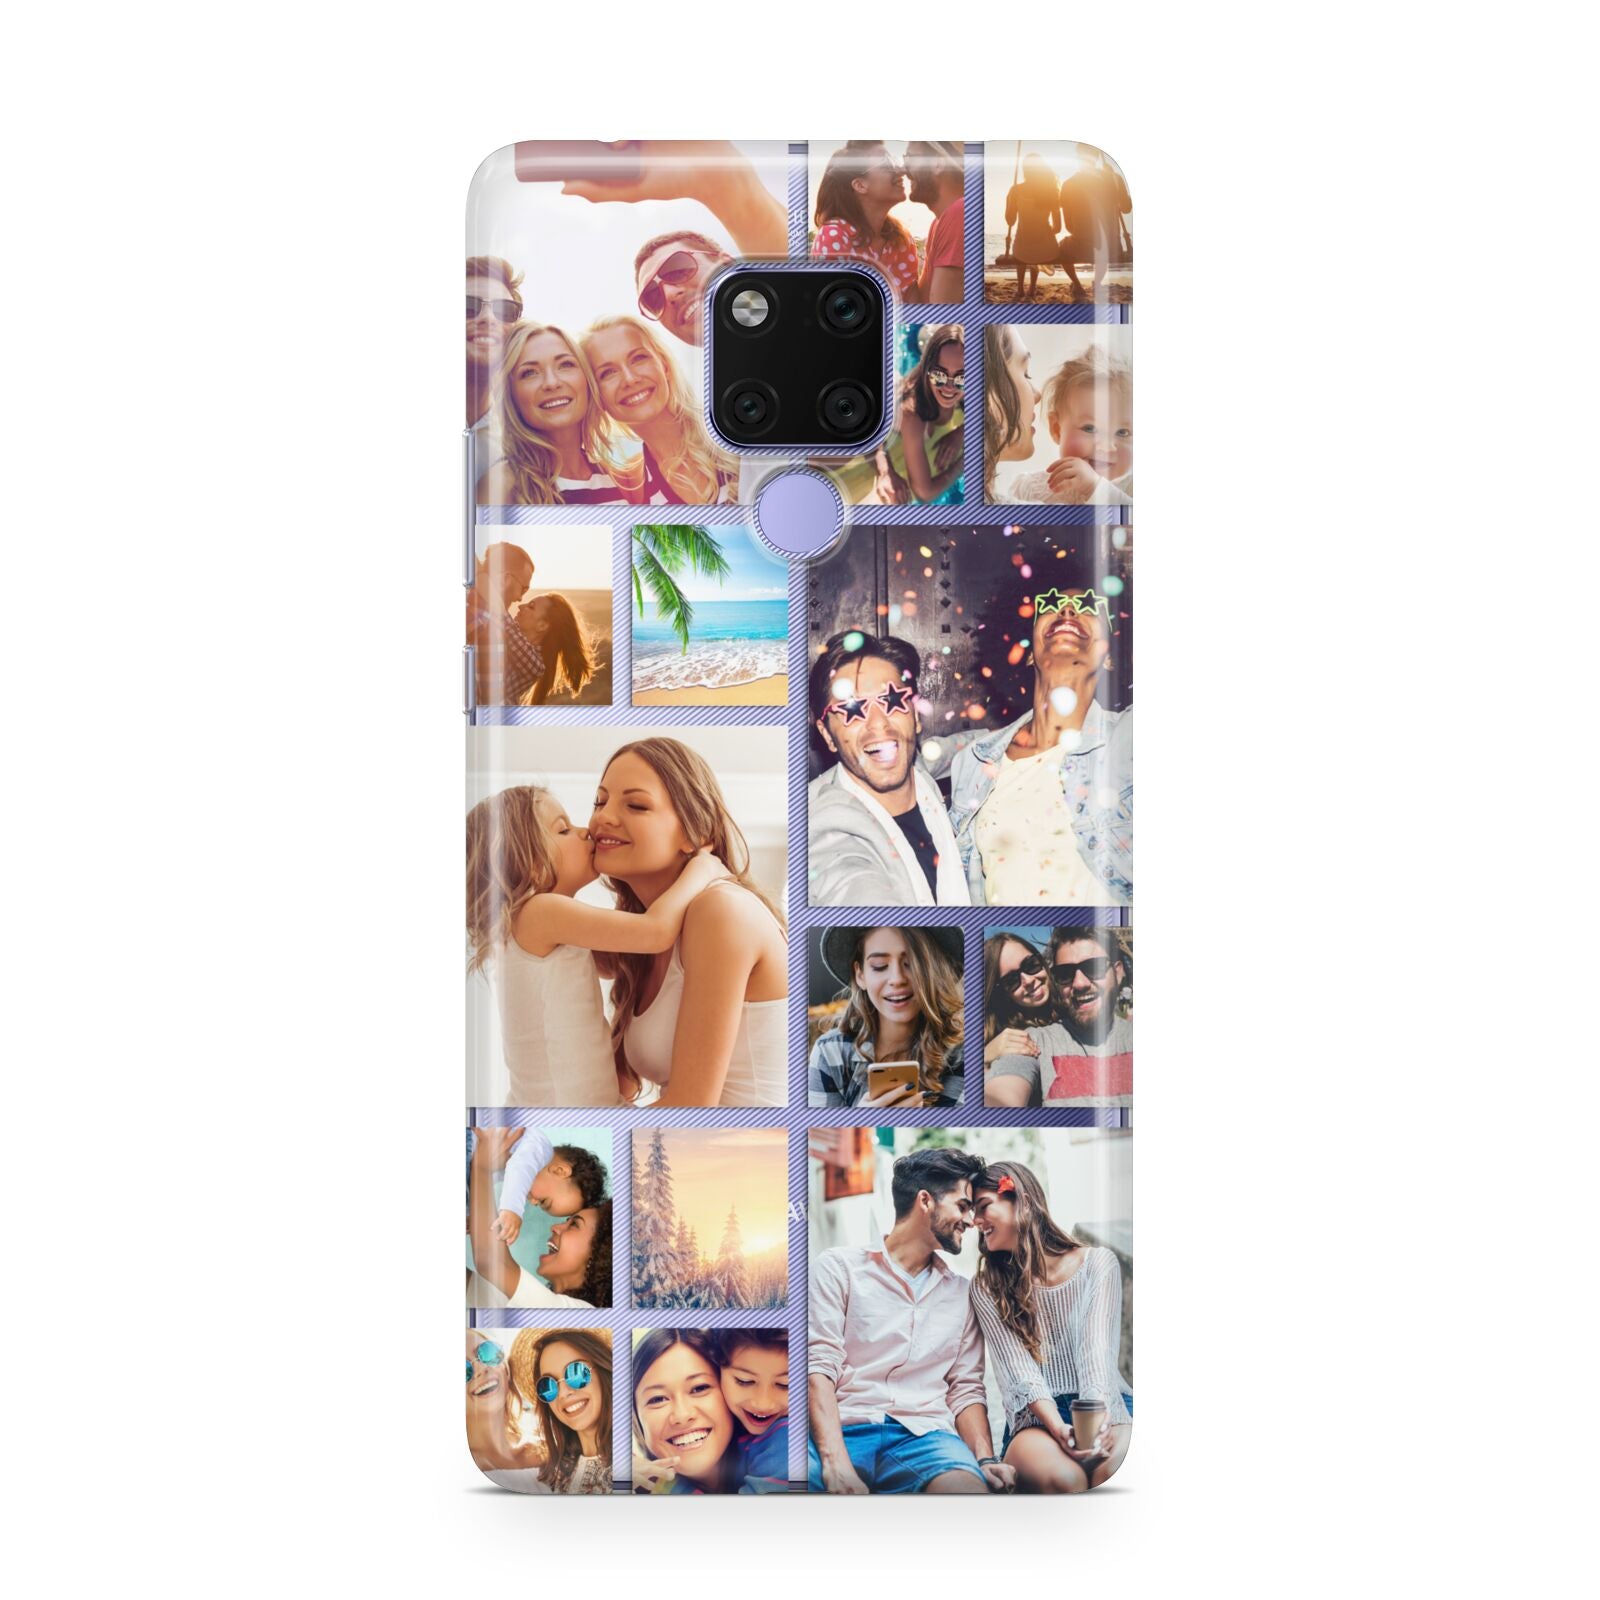 Abstract Multi Tile Photo Montage Upload Huawei Mate 20X Phone Case